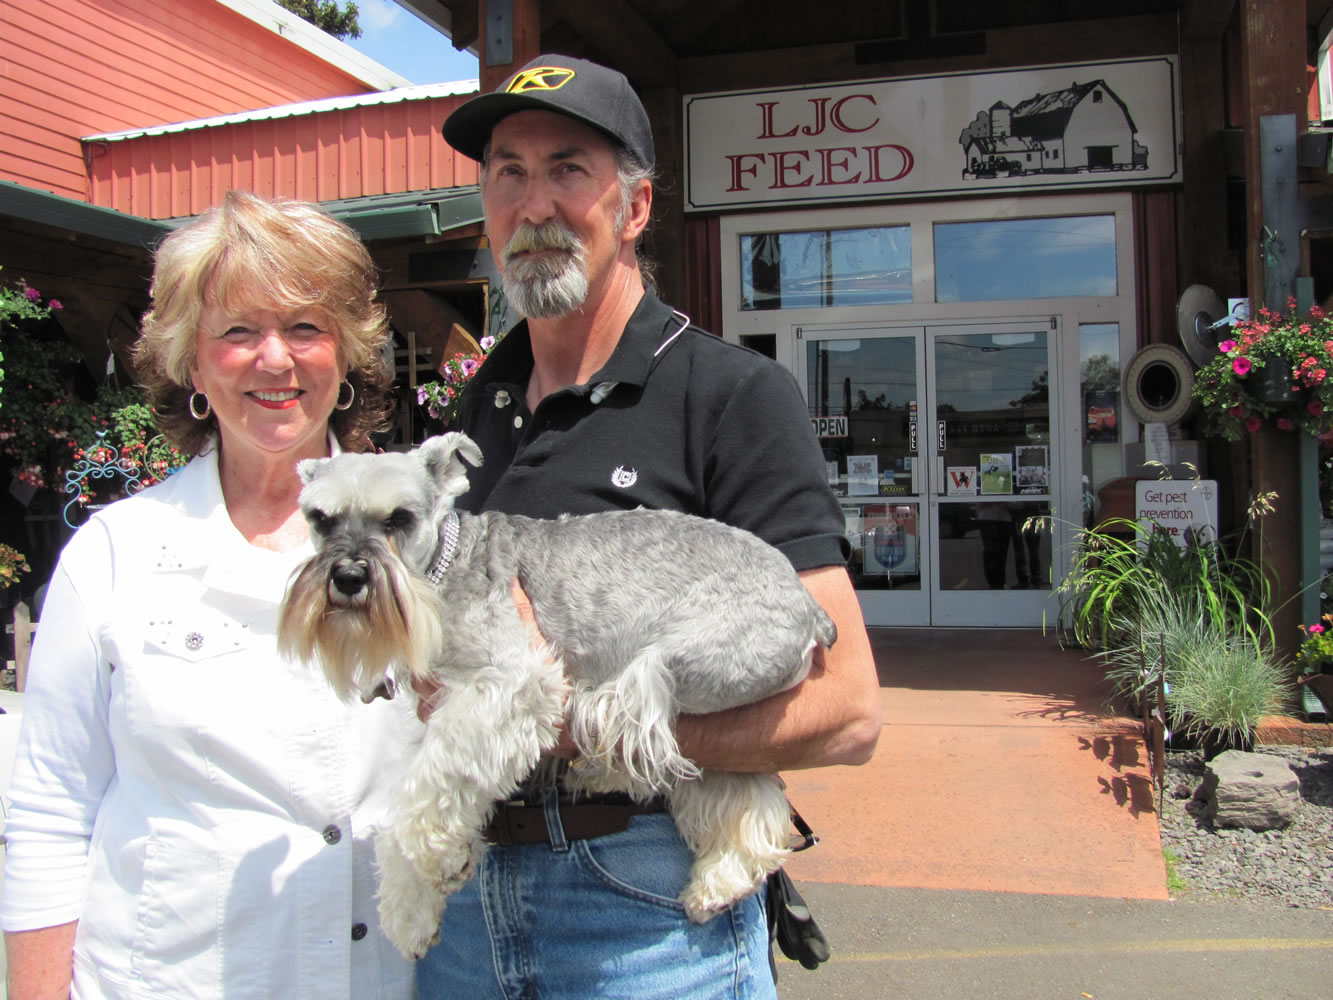 Patty and Gordon French, accompanied by their schnauzer Lulu, have been named the Camas-Washougal Chamber of Commerce &quot;Business Persons of the Year.&quot; The Frenches have owned LJC Feed for 19 years. &quot;I think it's one of the biggest compliments that we could receive,&quot; Patty said, regarding the chamber award.